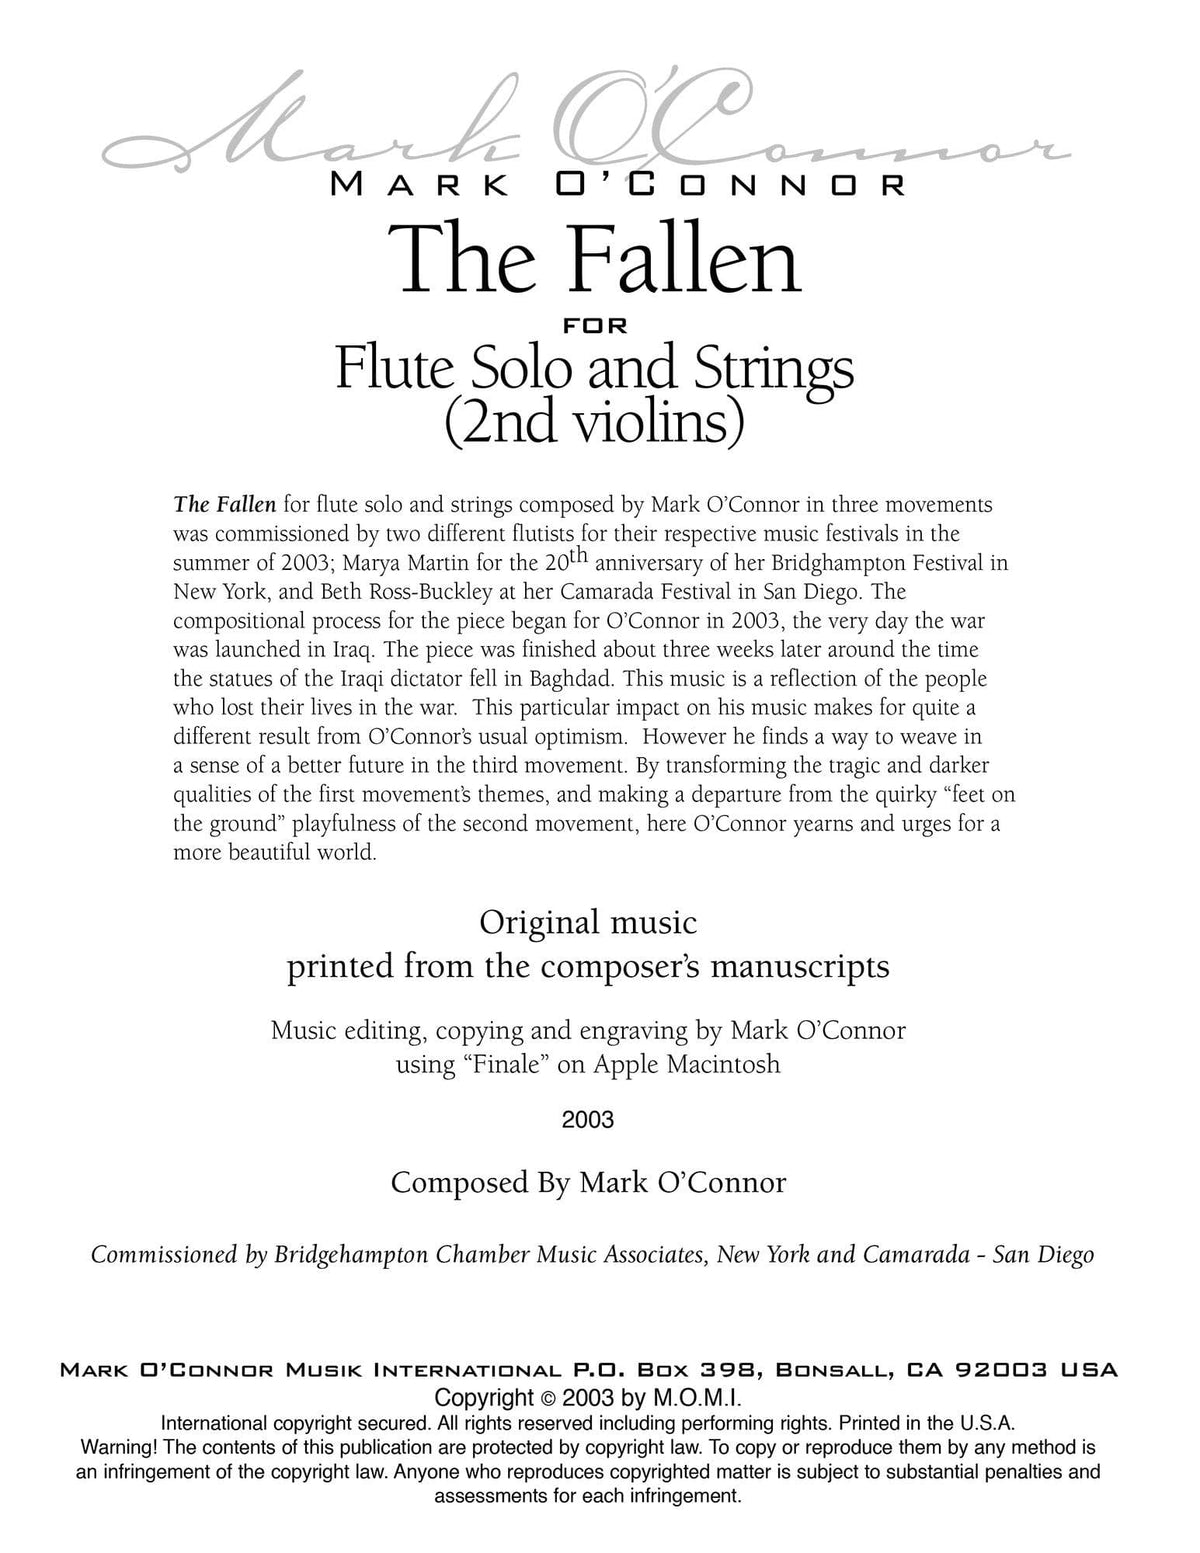 O'Connor, Mark - The Fallen for Flute and Strings - 2nd Violins - Digital Download